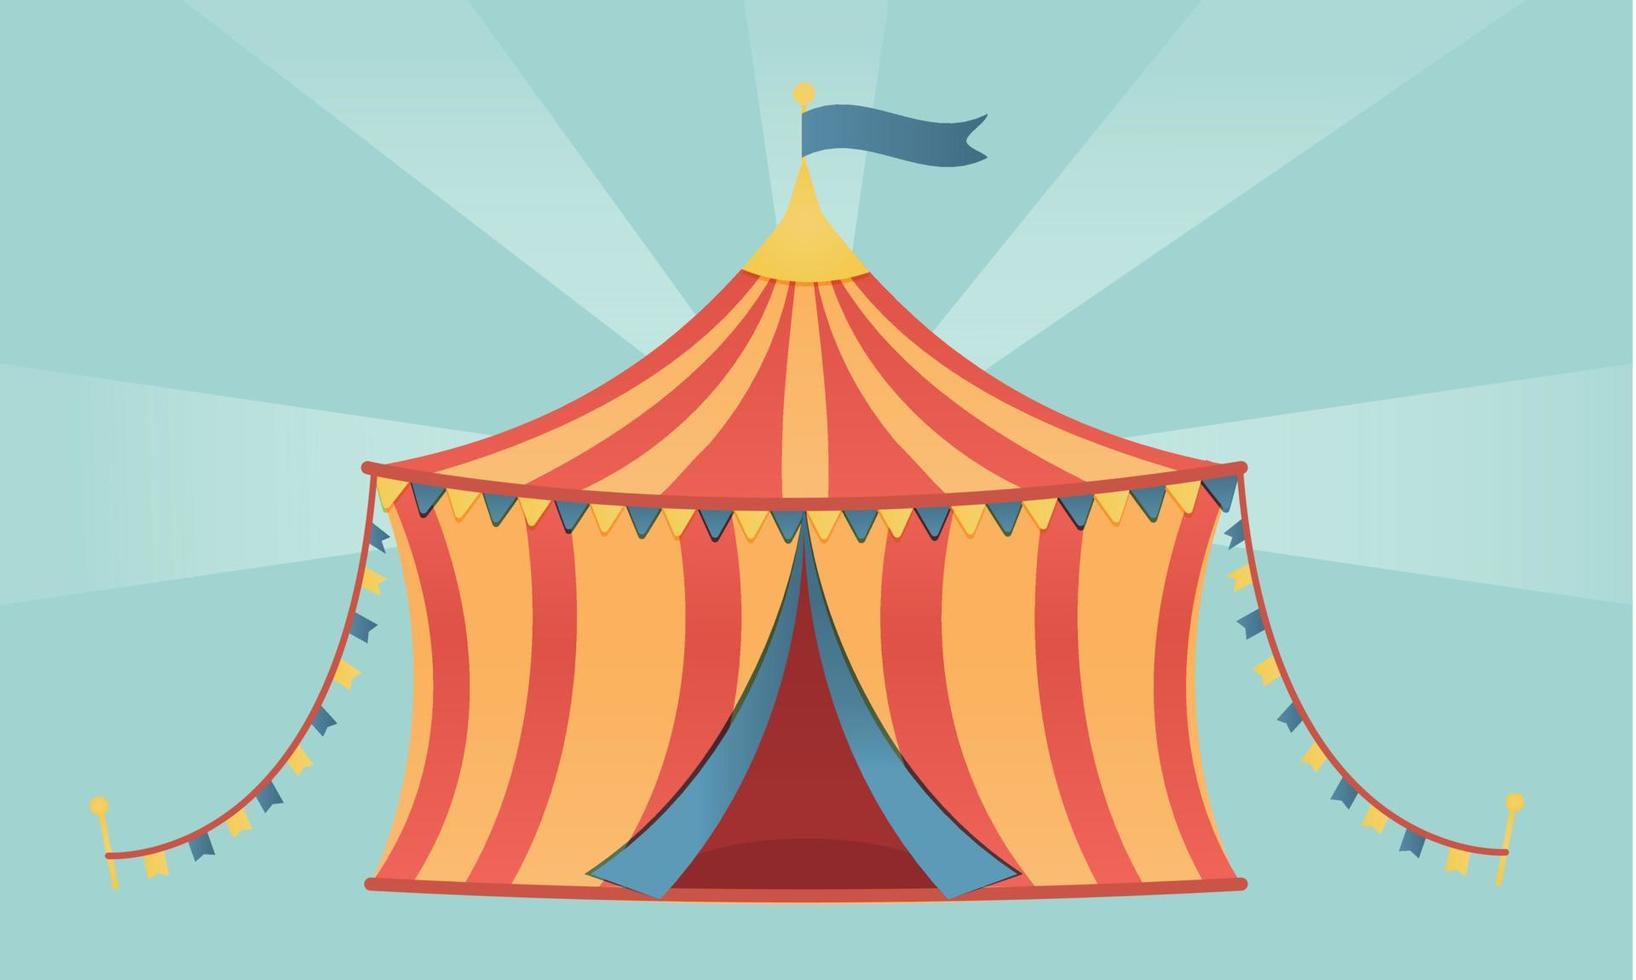 Circus tent orange, red. On blue background. vector